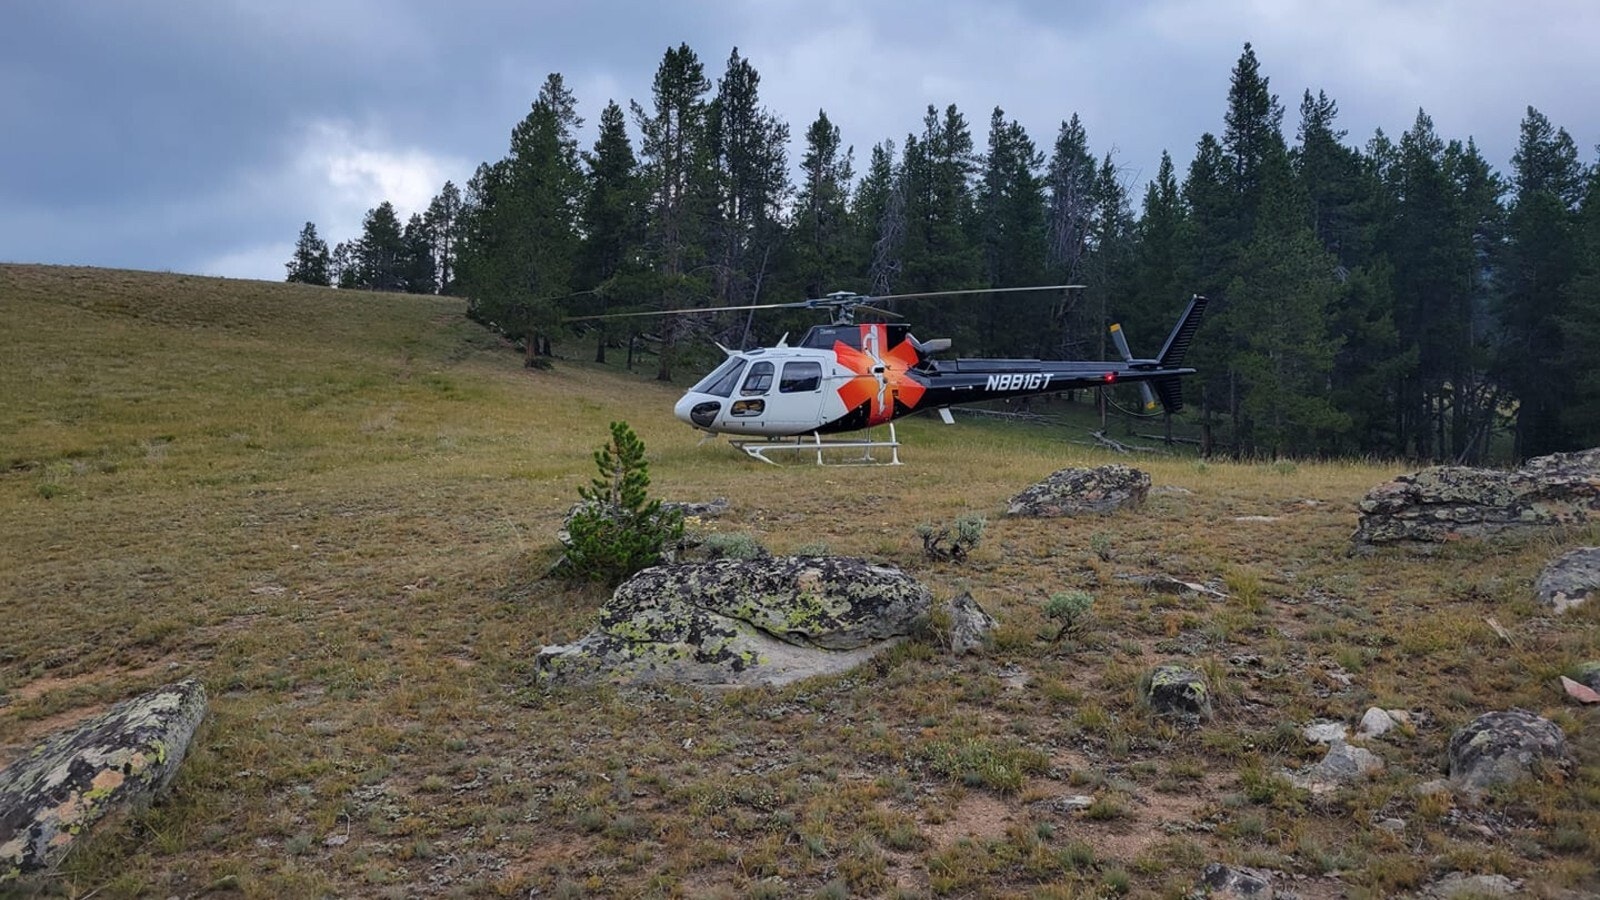 Big horn county search and rescue